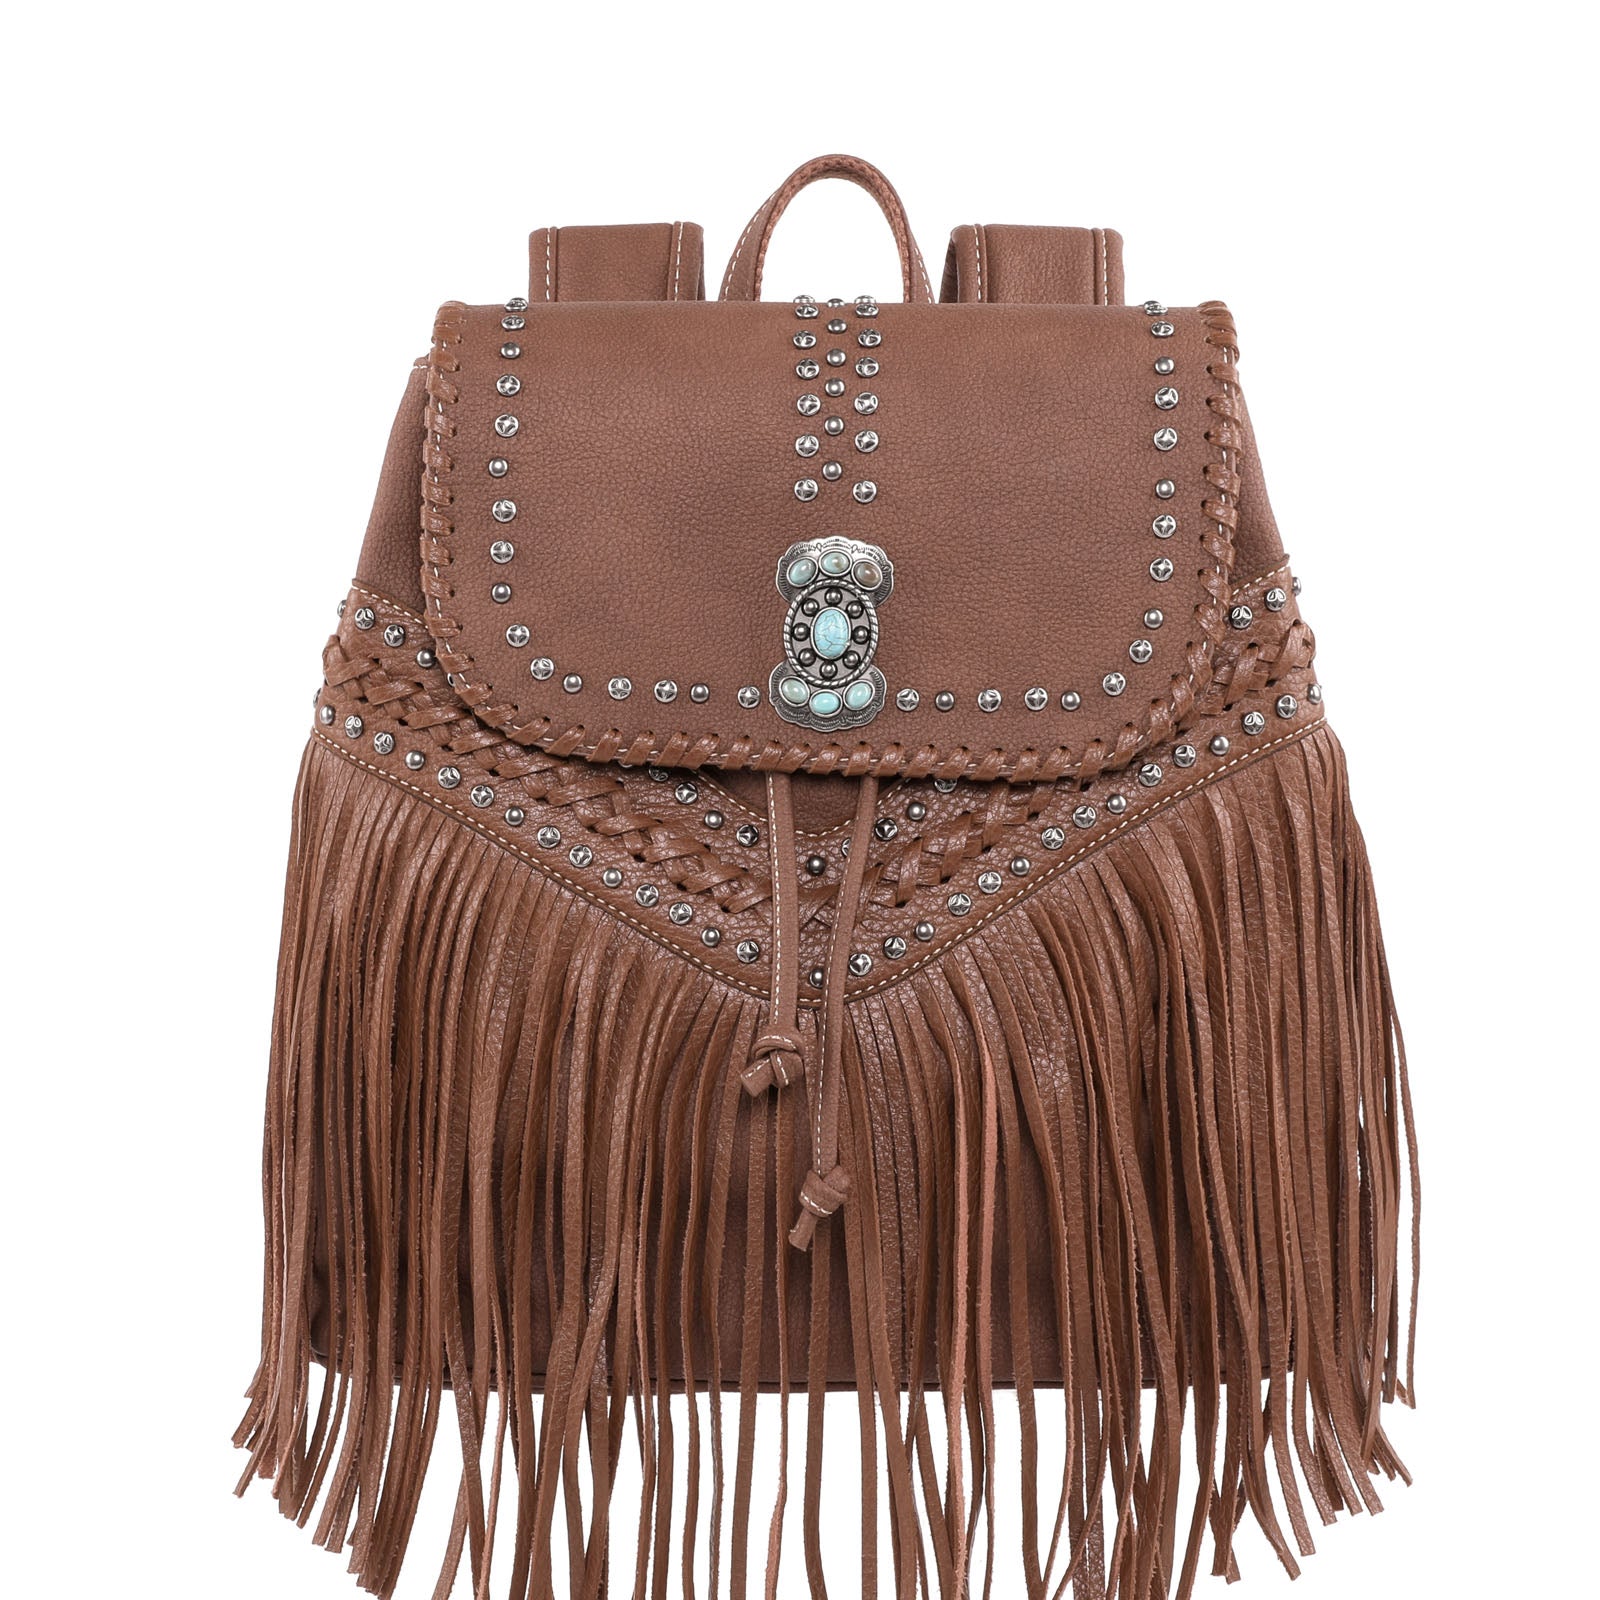 Montana West Fringe Collection Backpack - Cowgirl Wear